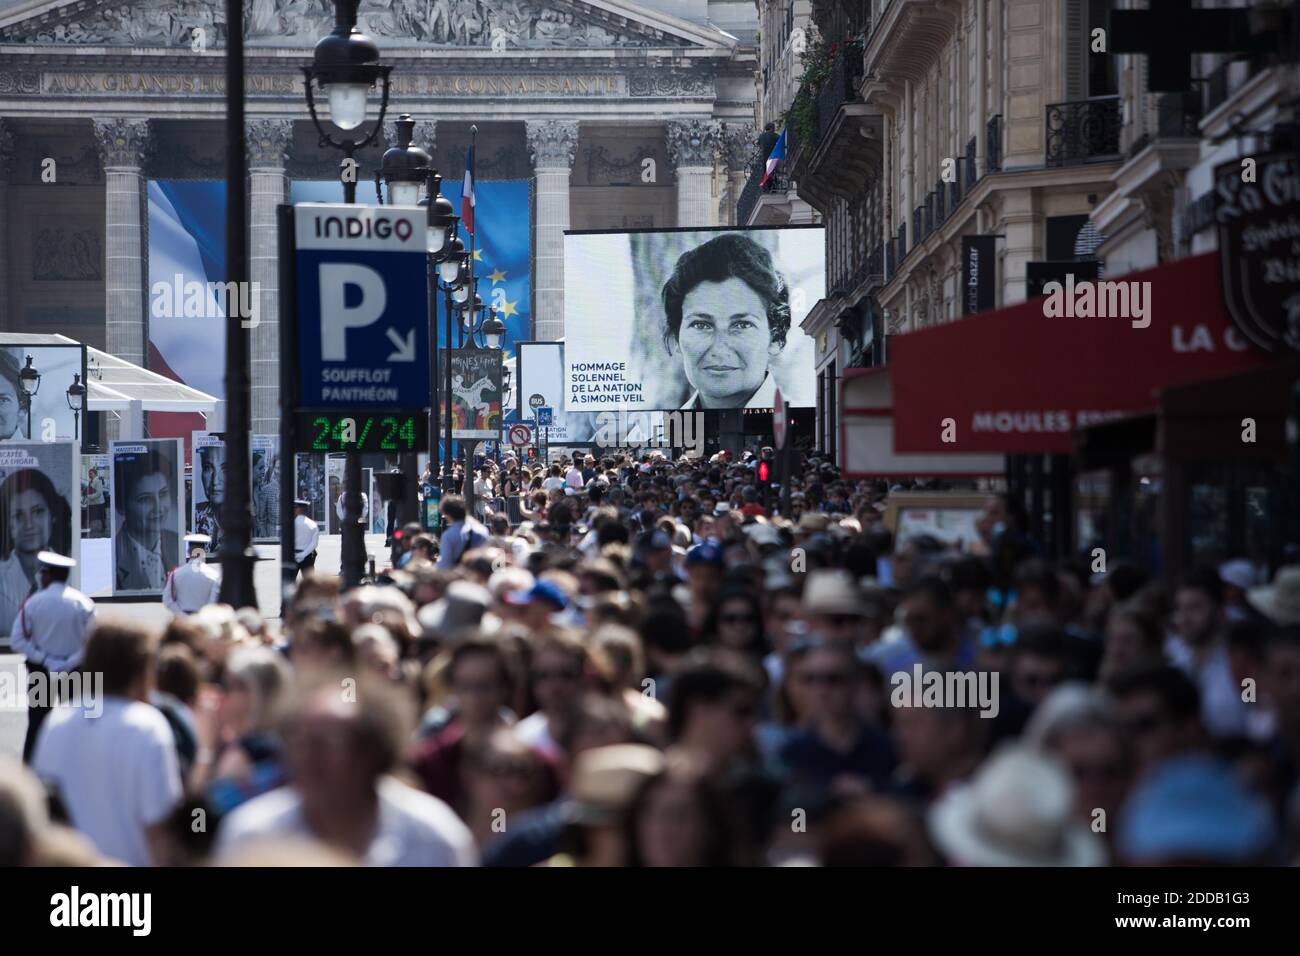 Ceremony entering former Minister of Health Simone Veil and her Husband Antoine into the hall of fame Pantheon. The Ceremony comes one year after Veilâ€™s Death. French President Emmanuel Macron is scheduled to deliver a speech after a procession bringing the coffins up the rue Soufflot and to the resting place in Paris, France on july 1, 2018. Photo by Raphaël Lafargue/ABACAPRESS.COM Stock Photo